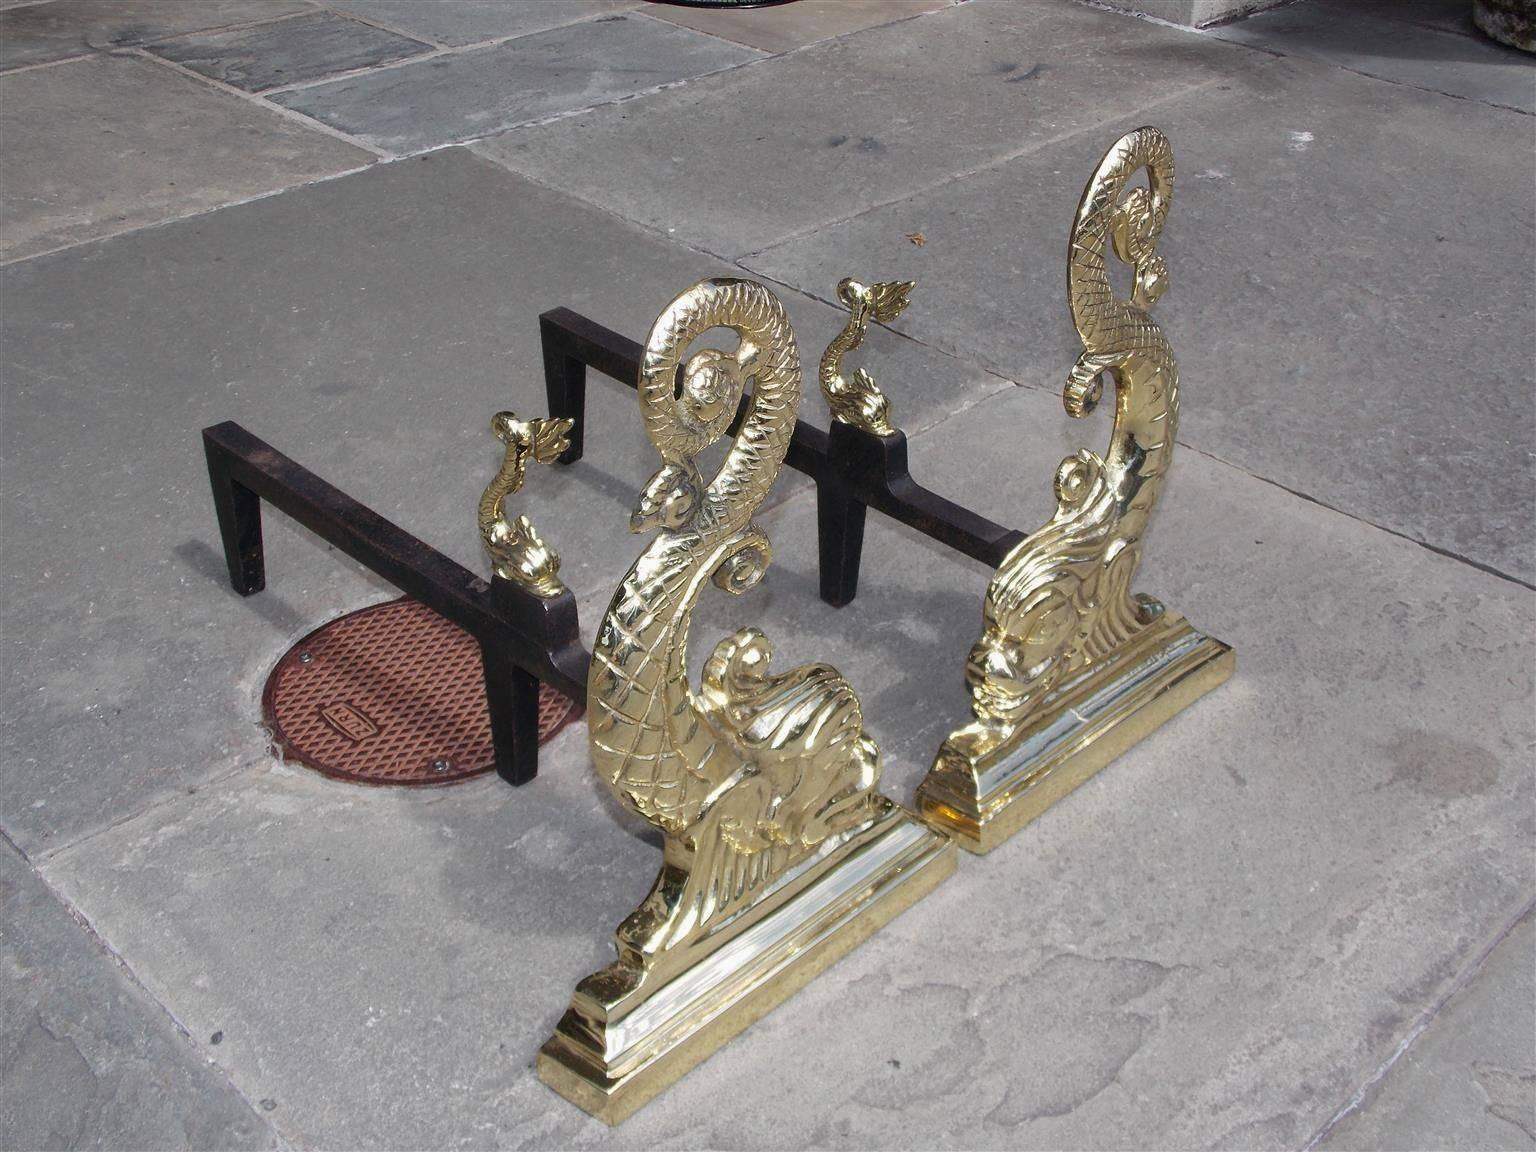 Pair of American brass decorative dolphin fire place andirons with flanking heads, scrolled intertwined engraved tails, matching miniature log stops , original iron legs, and resting on step back molded edge plinths, Mid-19th century.